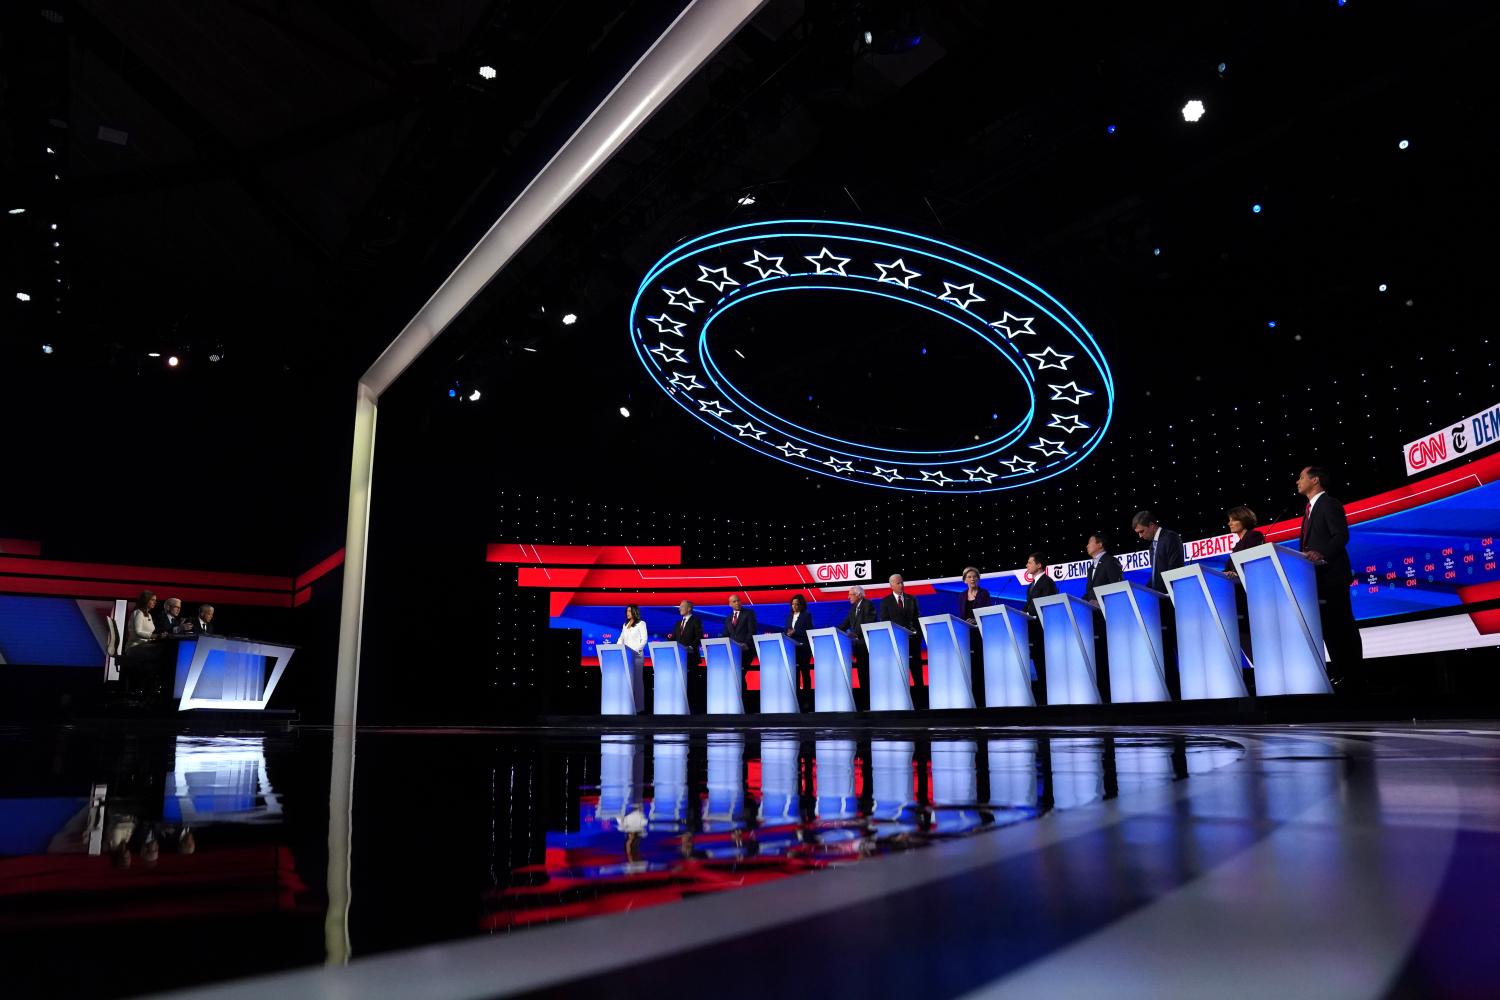 Twelve Democratic presidential candidates participate in the fourth U.S. Democratic presidential candidates 2020 election debate in Westerville, Ohio, U.S., October 15, 2019. REUTERS/Shannon Stapleton - HP1EFAG066F9T